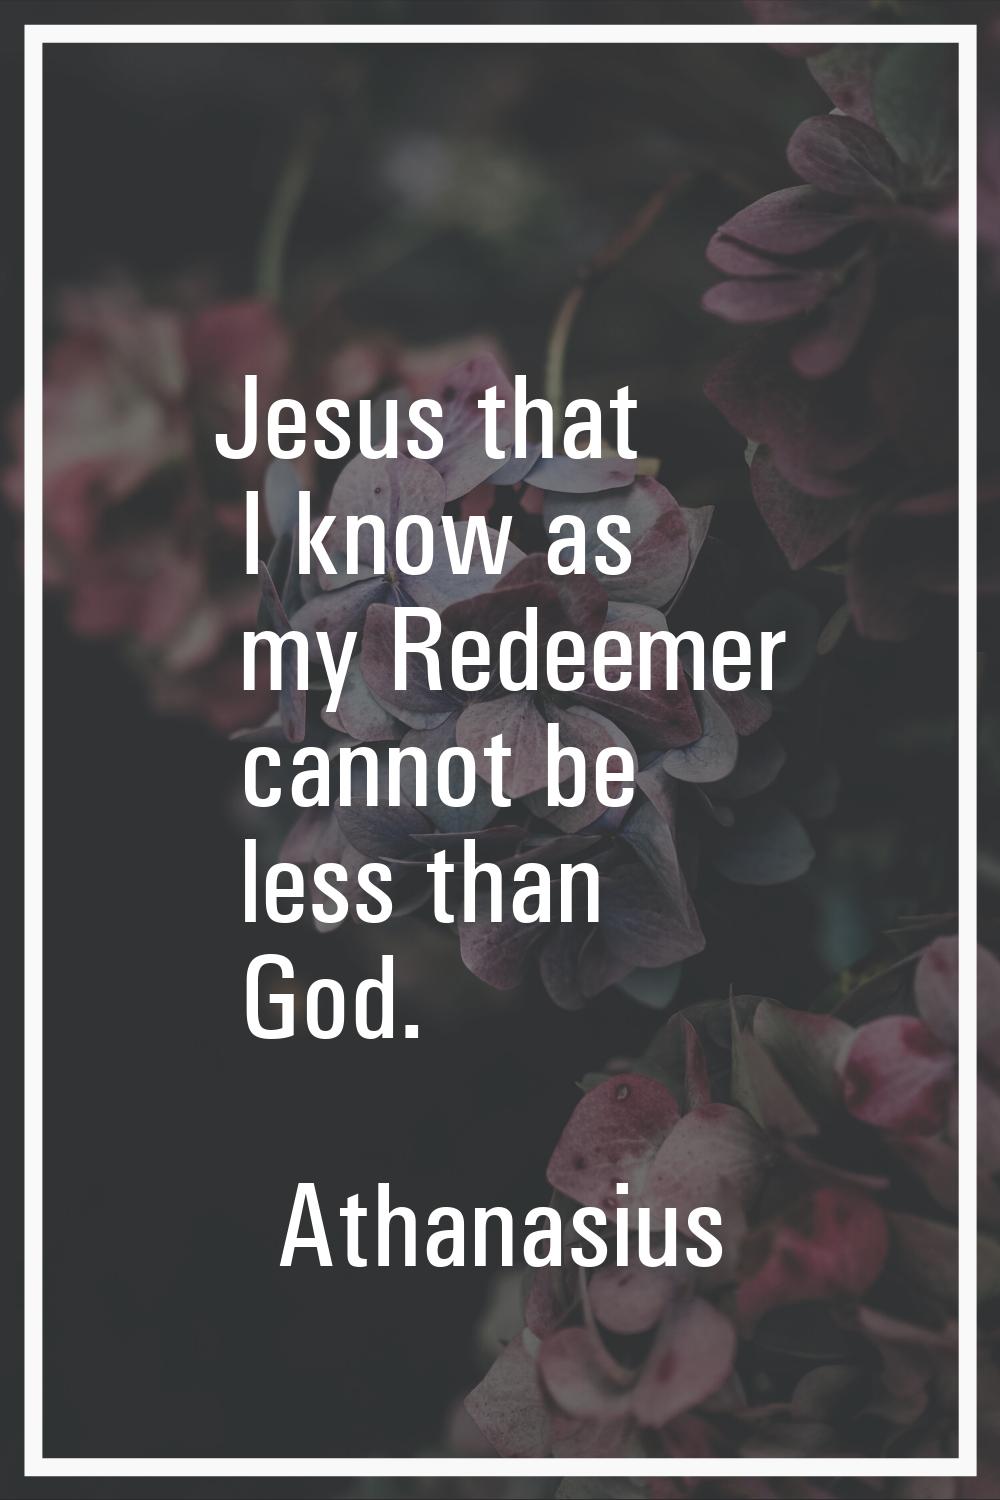 Jesus that I know as my Redeemer cannot be less than God.